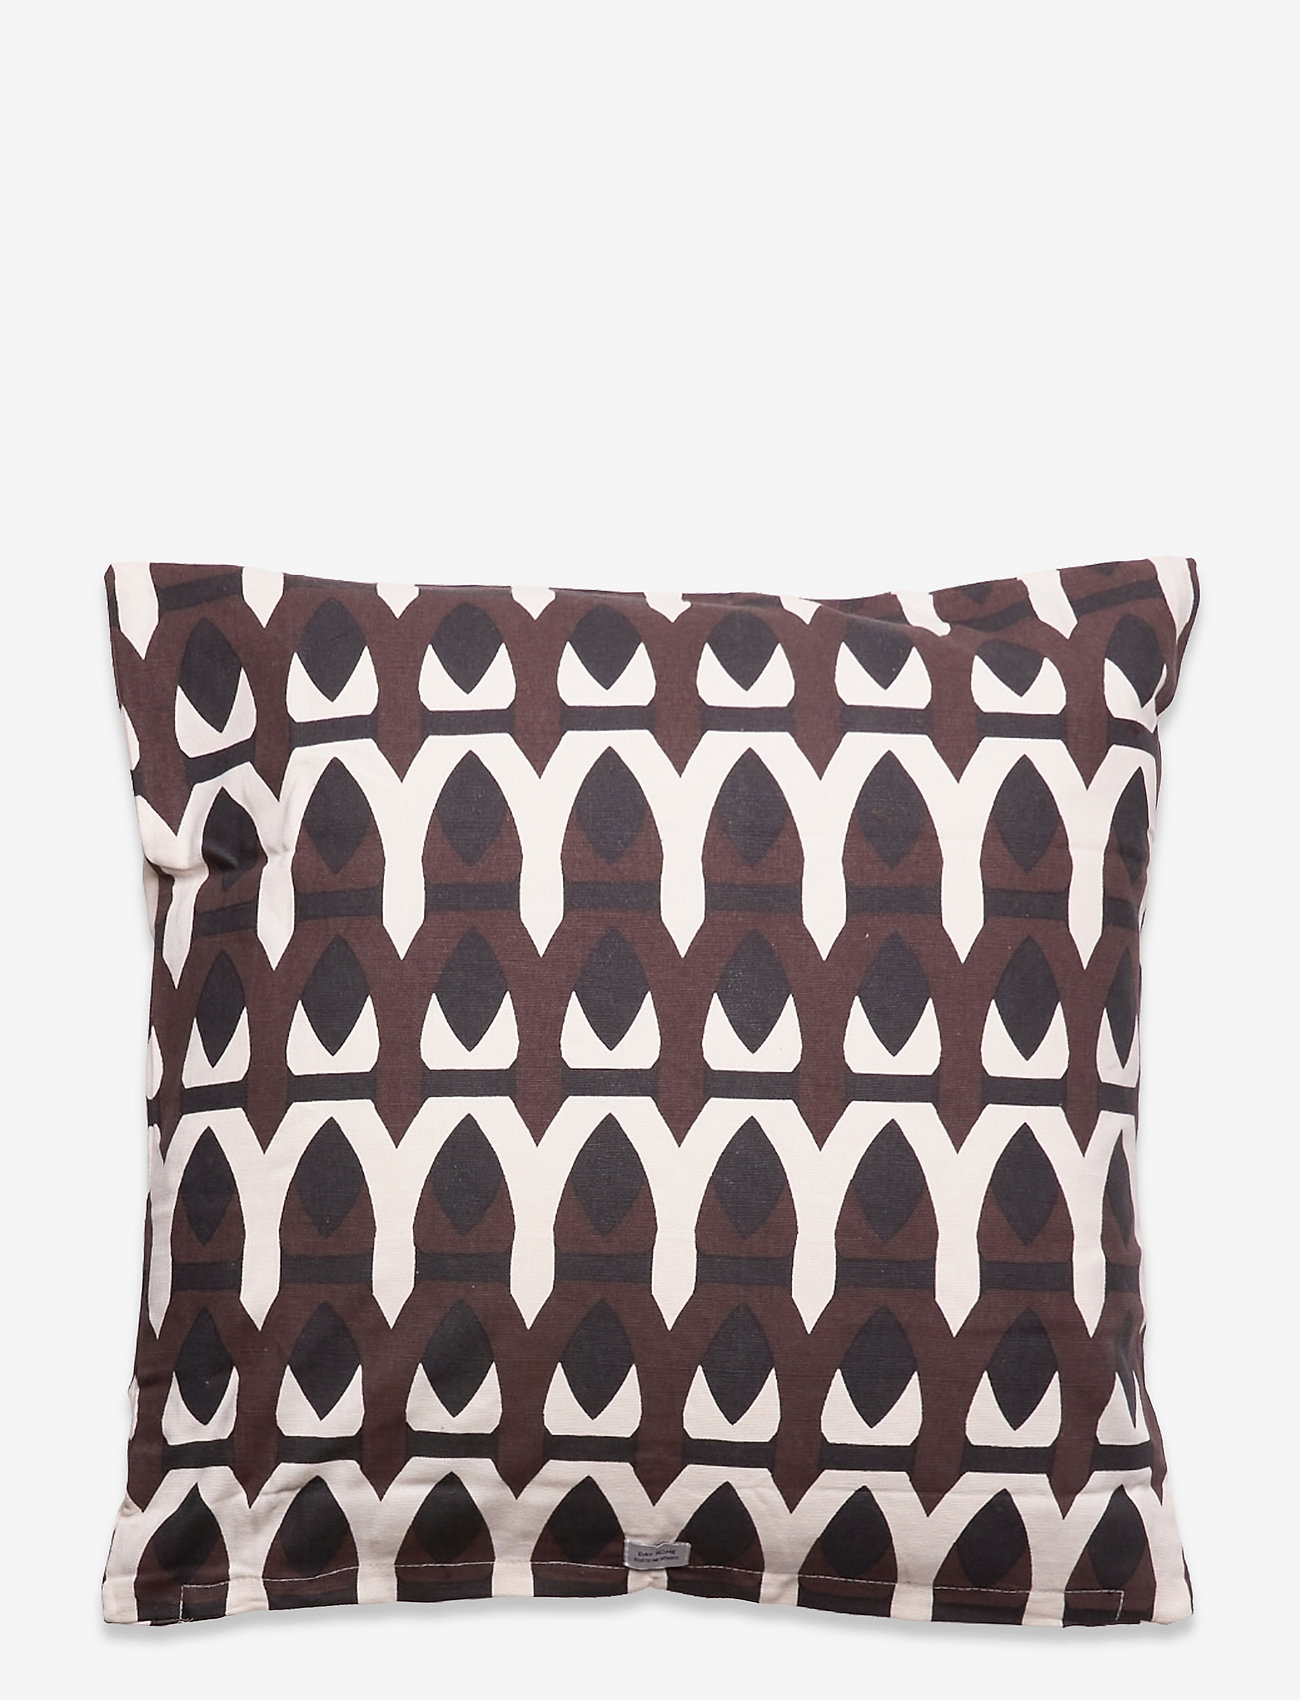 DAY Home - Day Contrast cushion cover - die niedrigsten preise - black; brown; off white - 1